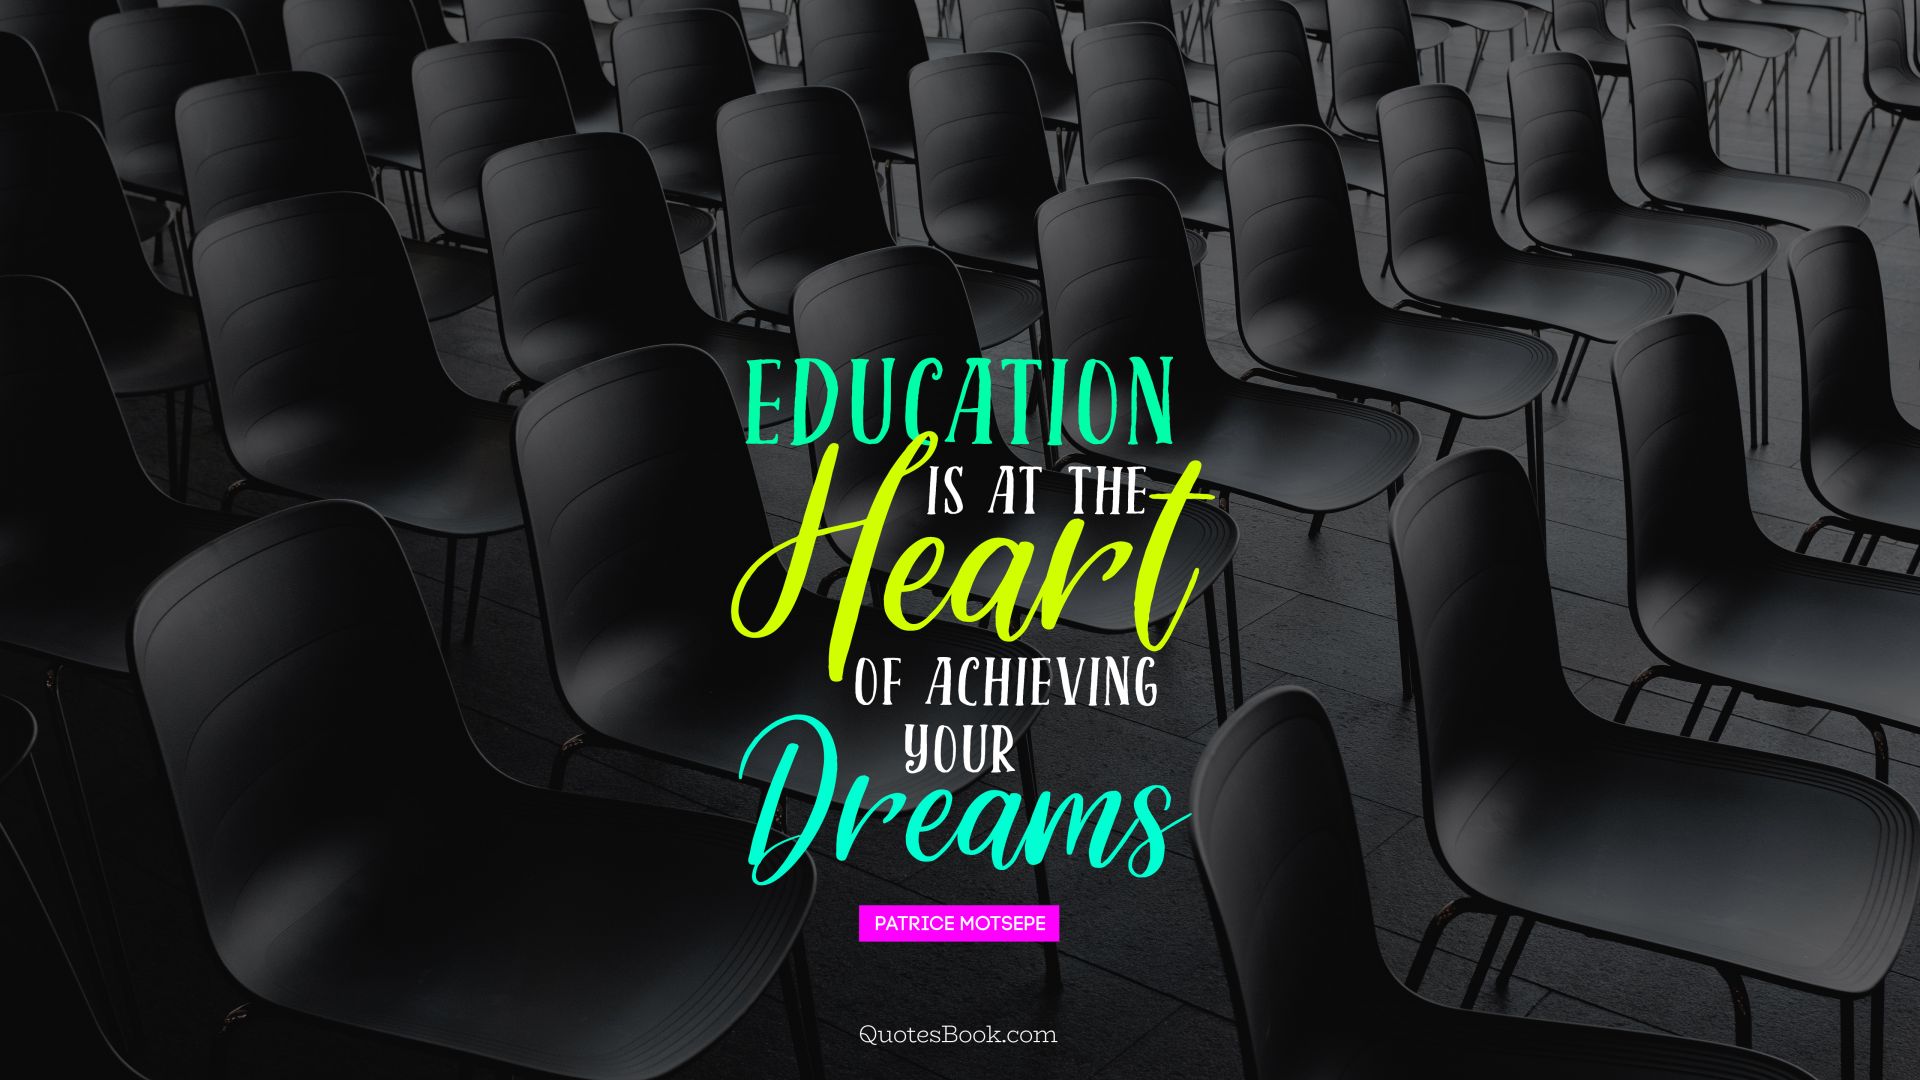 Education is at the heart of achieving your dreams